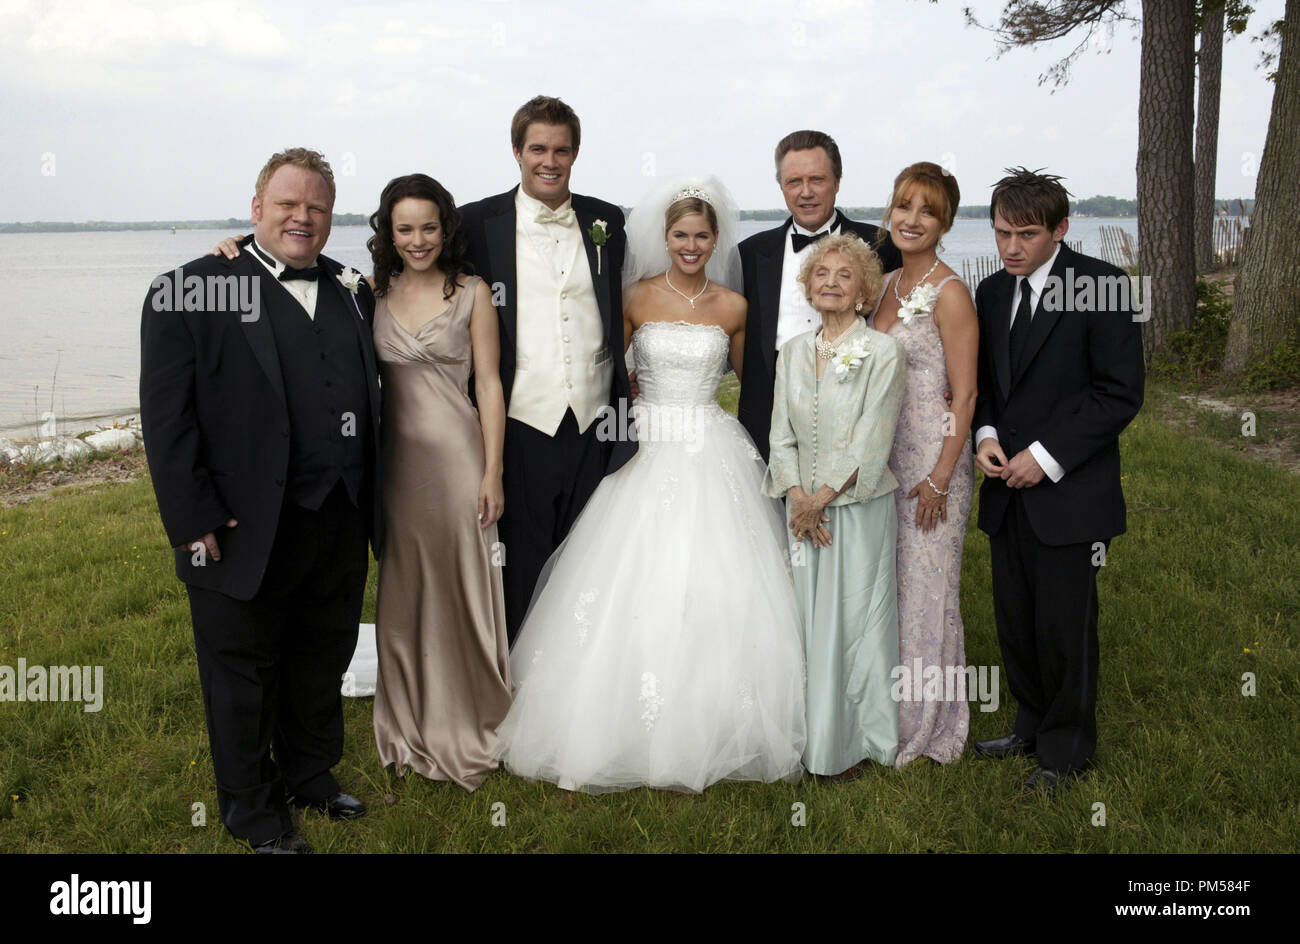 studio publicity still from wedding crashers larry joe campbell rachel mcadams geoff stults jennifer alden christopher walken ellen albertini dow jane seymour keir odonnell 2005 new line cinema photo by richard cartwright file reference 307361462tha for editorial use only all rights reserved PM584F